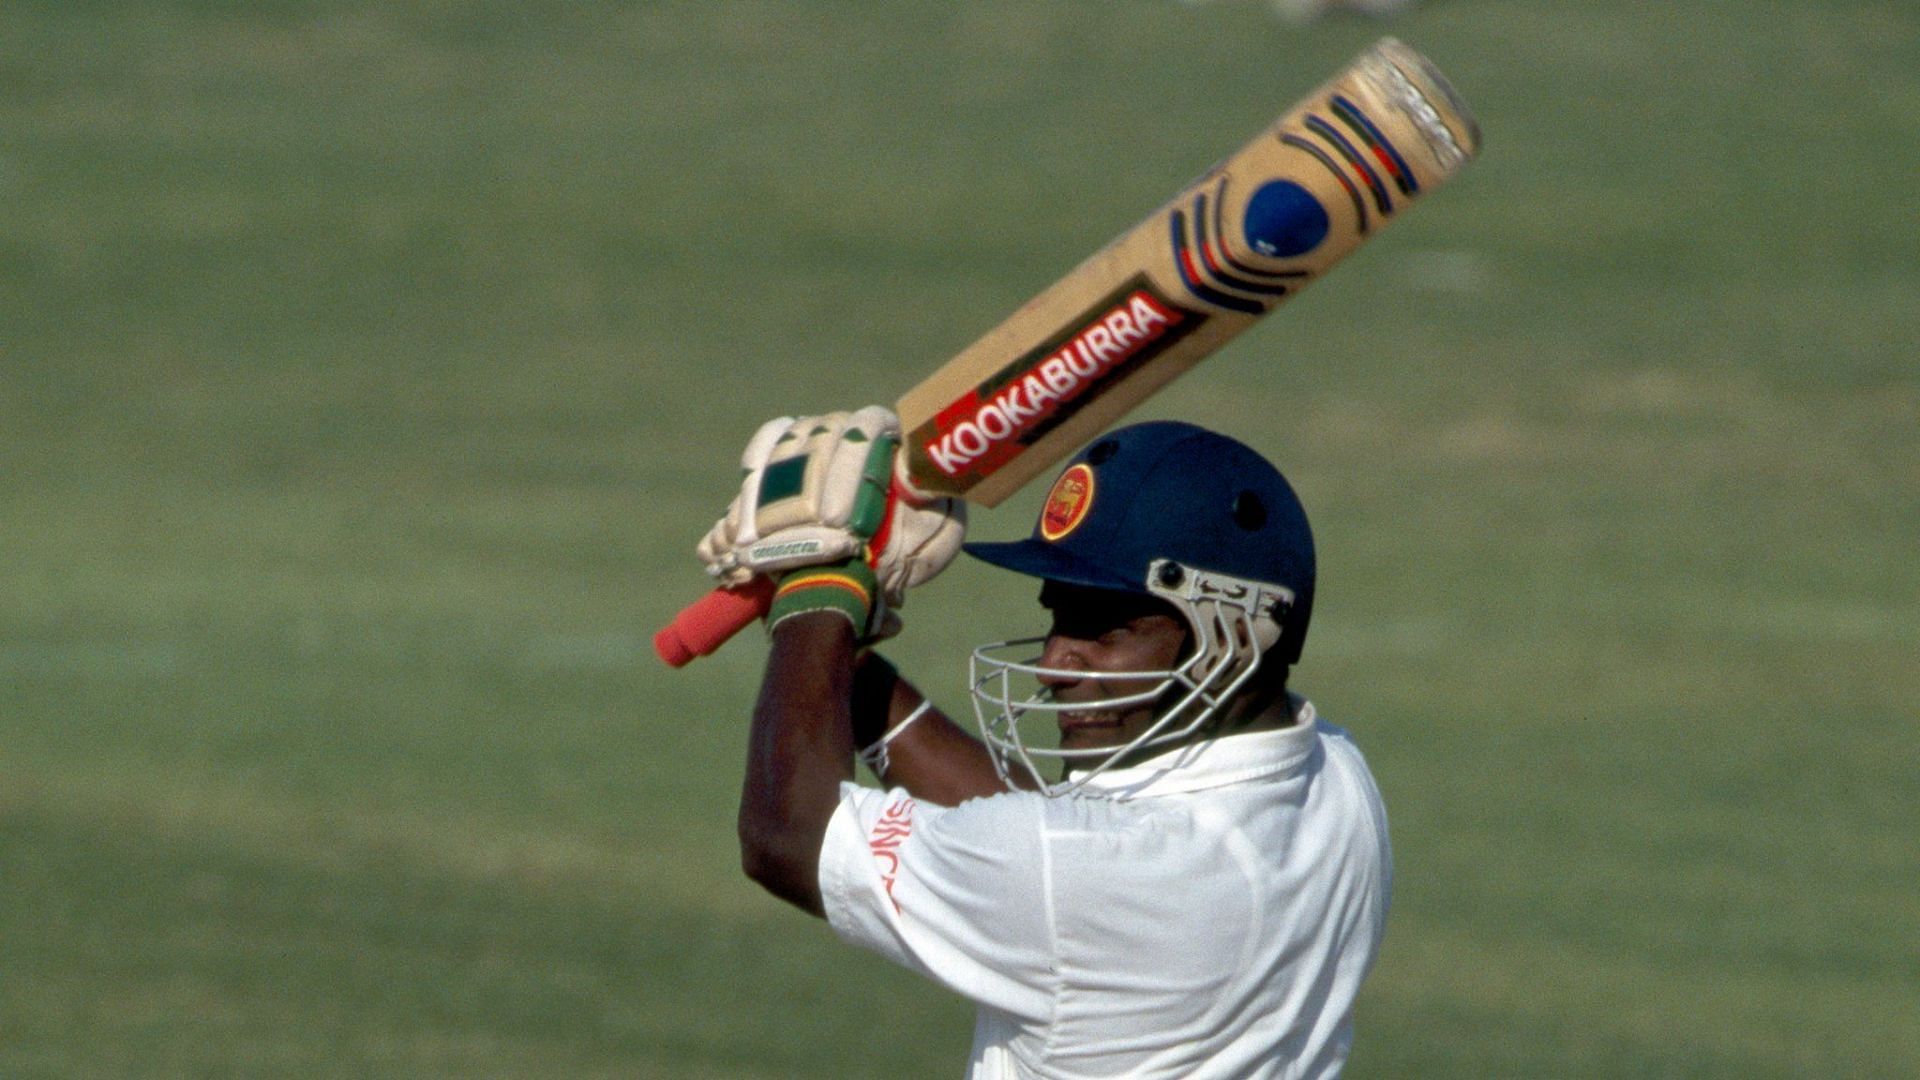 The viral image of Romesh Kaluwitharana dismissed for 0 with the score at 70-1 was from this game, in which Sanath Jayasuriya scored a 17-ball half-century against Pakistan in Singapore. Image Source: ICC Twitter